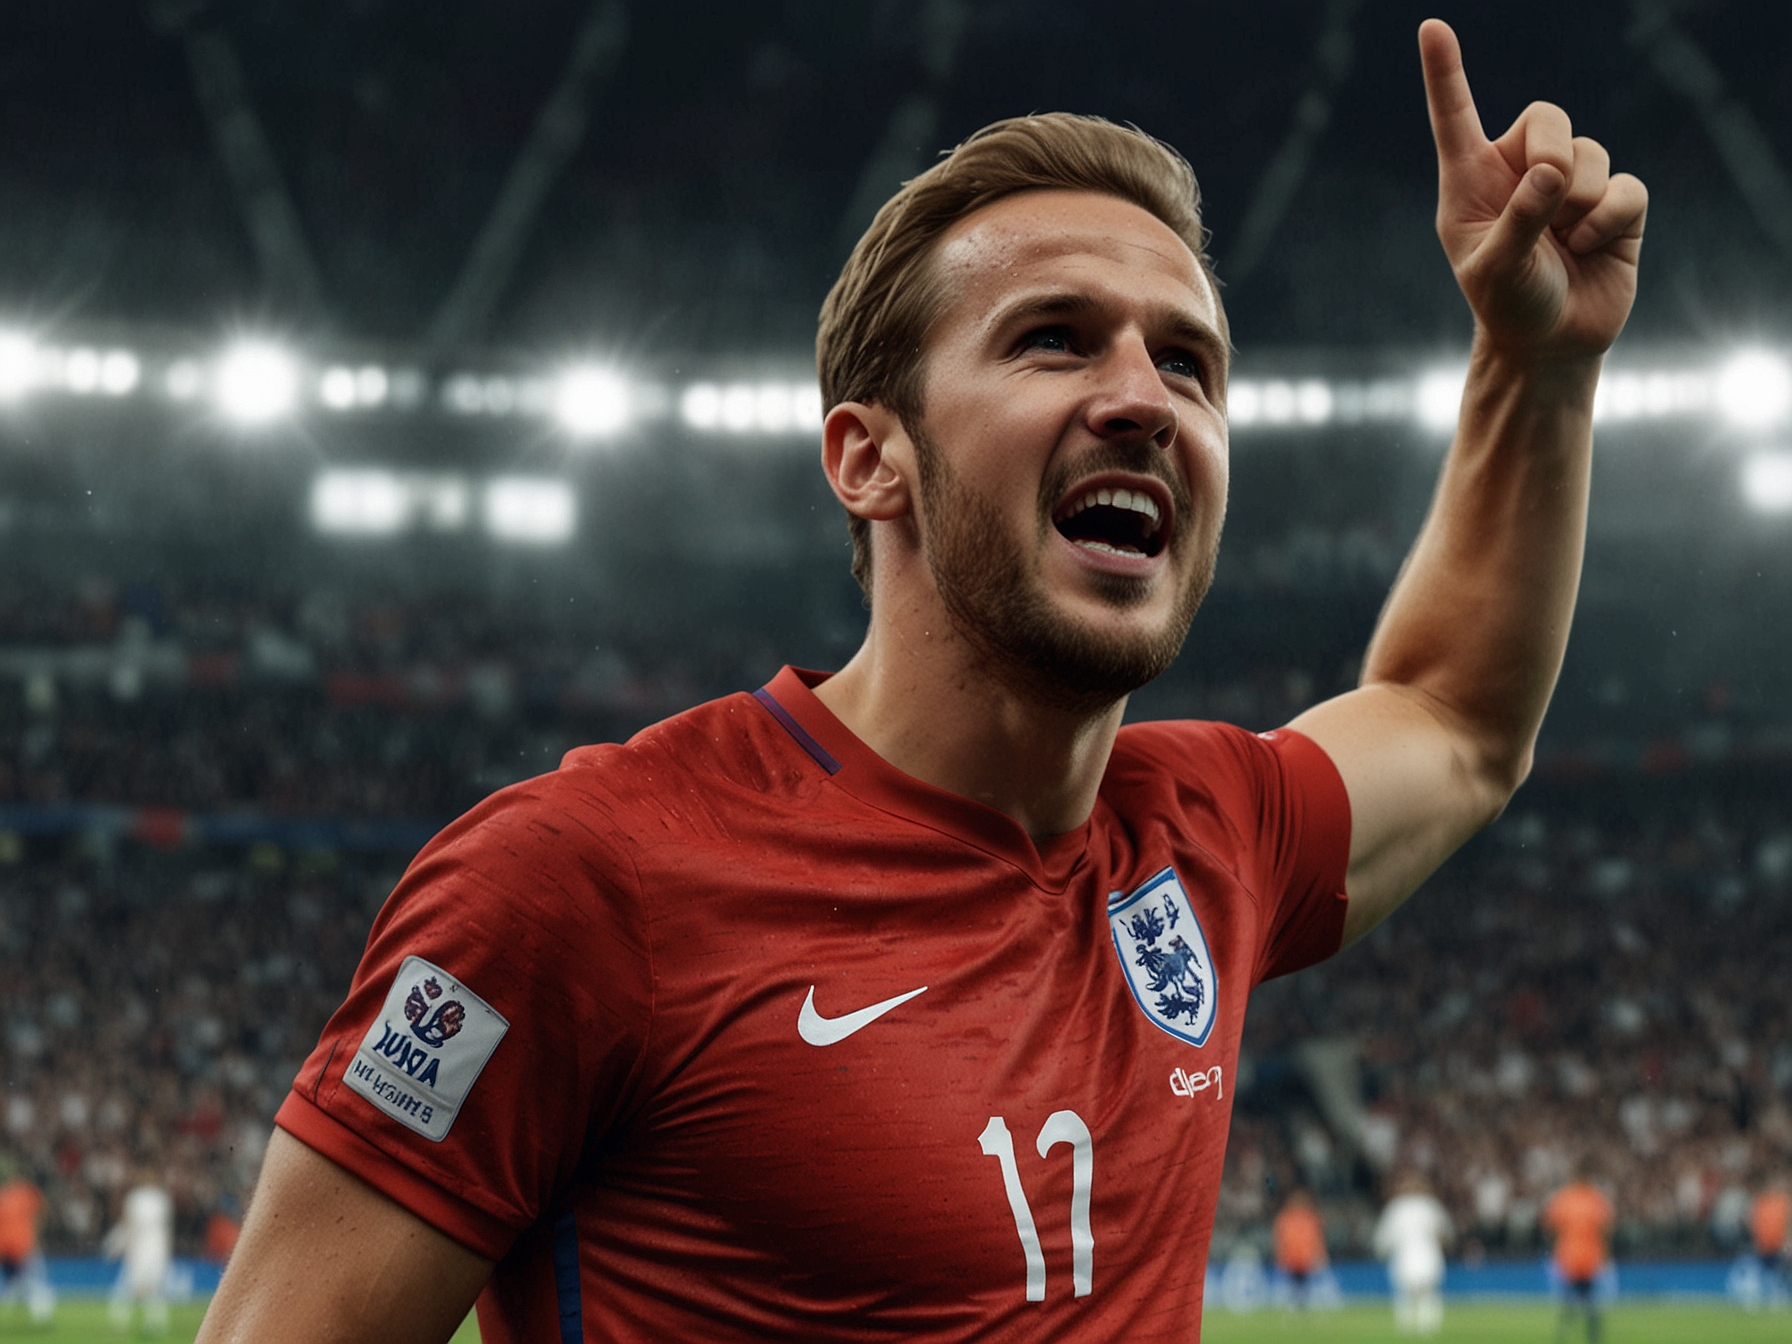 Harry Kane making a significant gesture while celebrating a goal during England's match against Serbia.